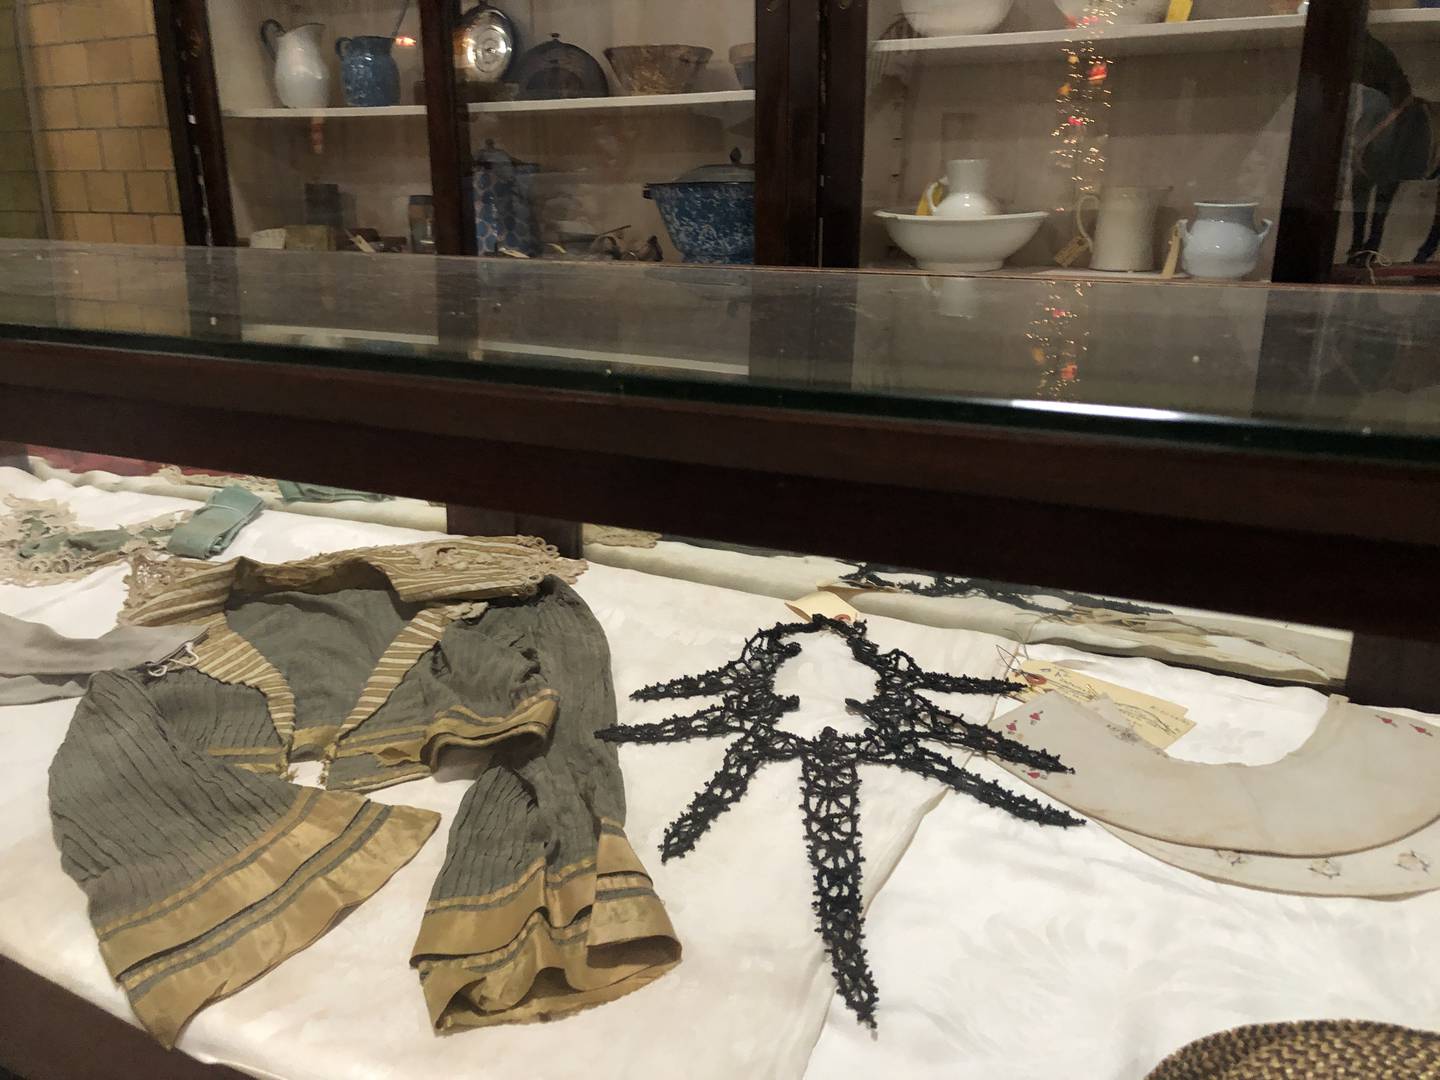 Textiles and clothing are part of the McHenry County Museum and Historical Society collection at its Union location.